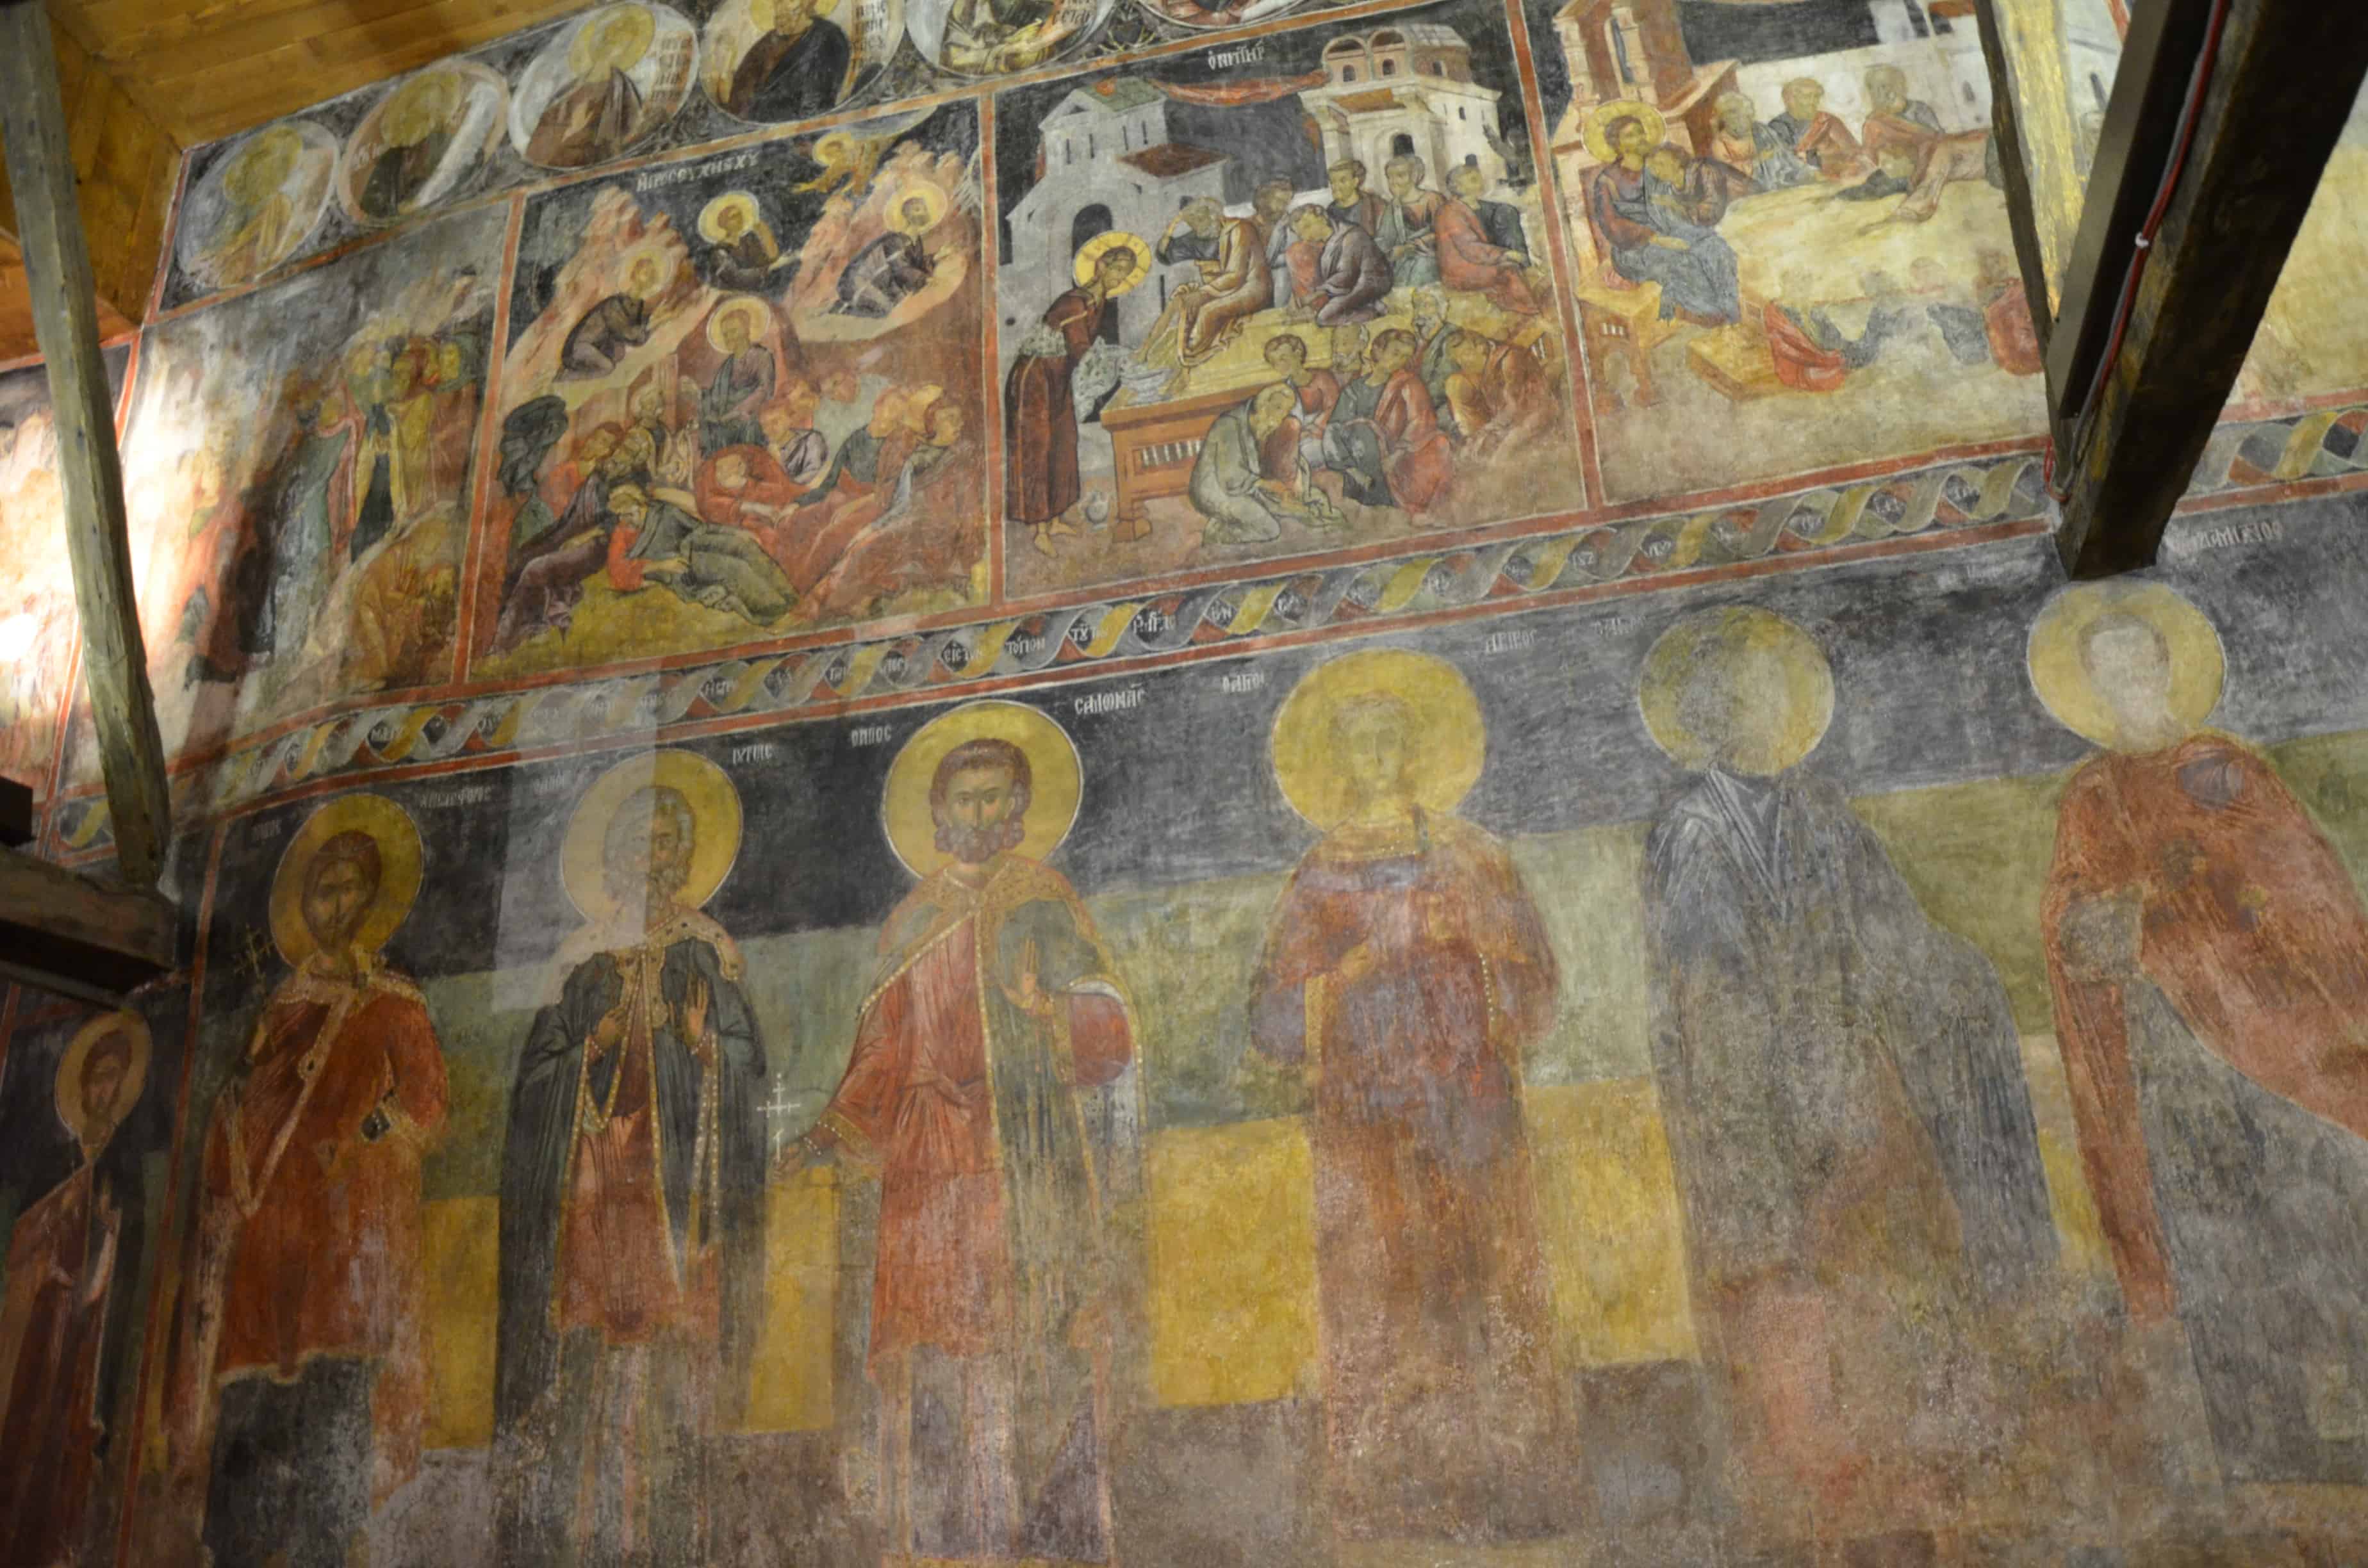 Biblical scenes (top) and saints (bottom) in the nave at the Church of Saint Stephen in Nessebar, Bulgaria